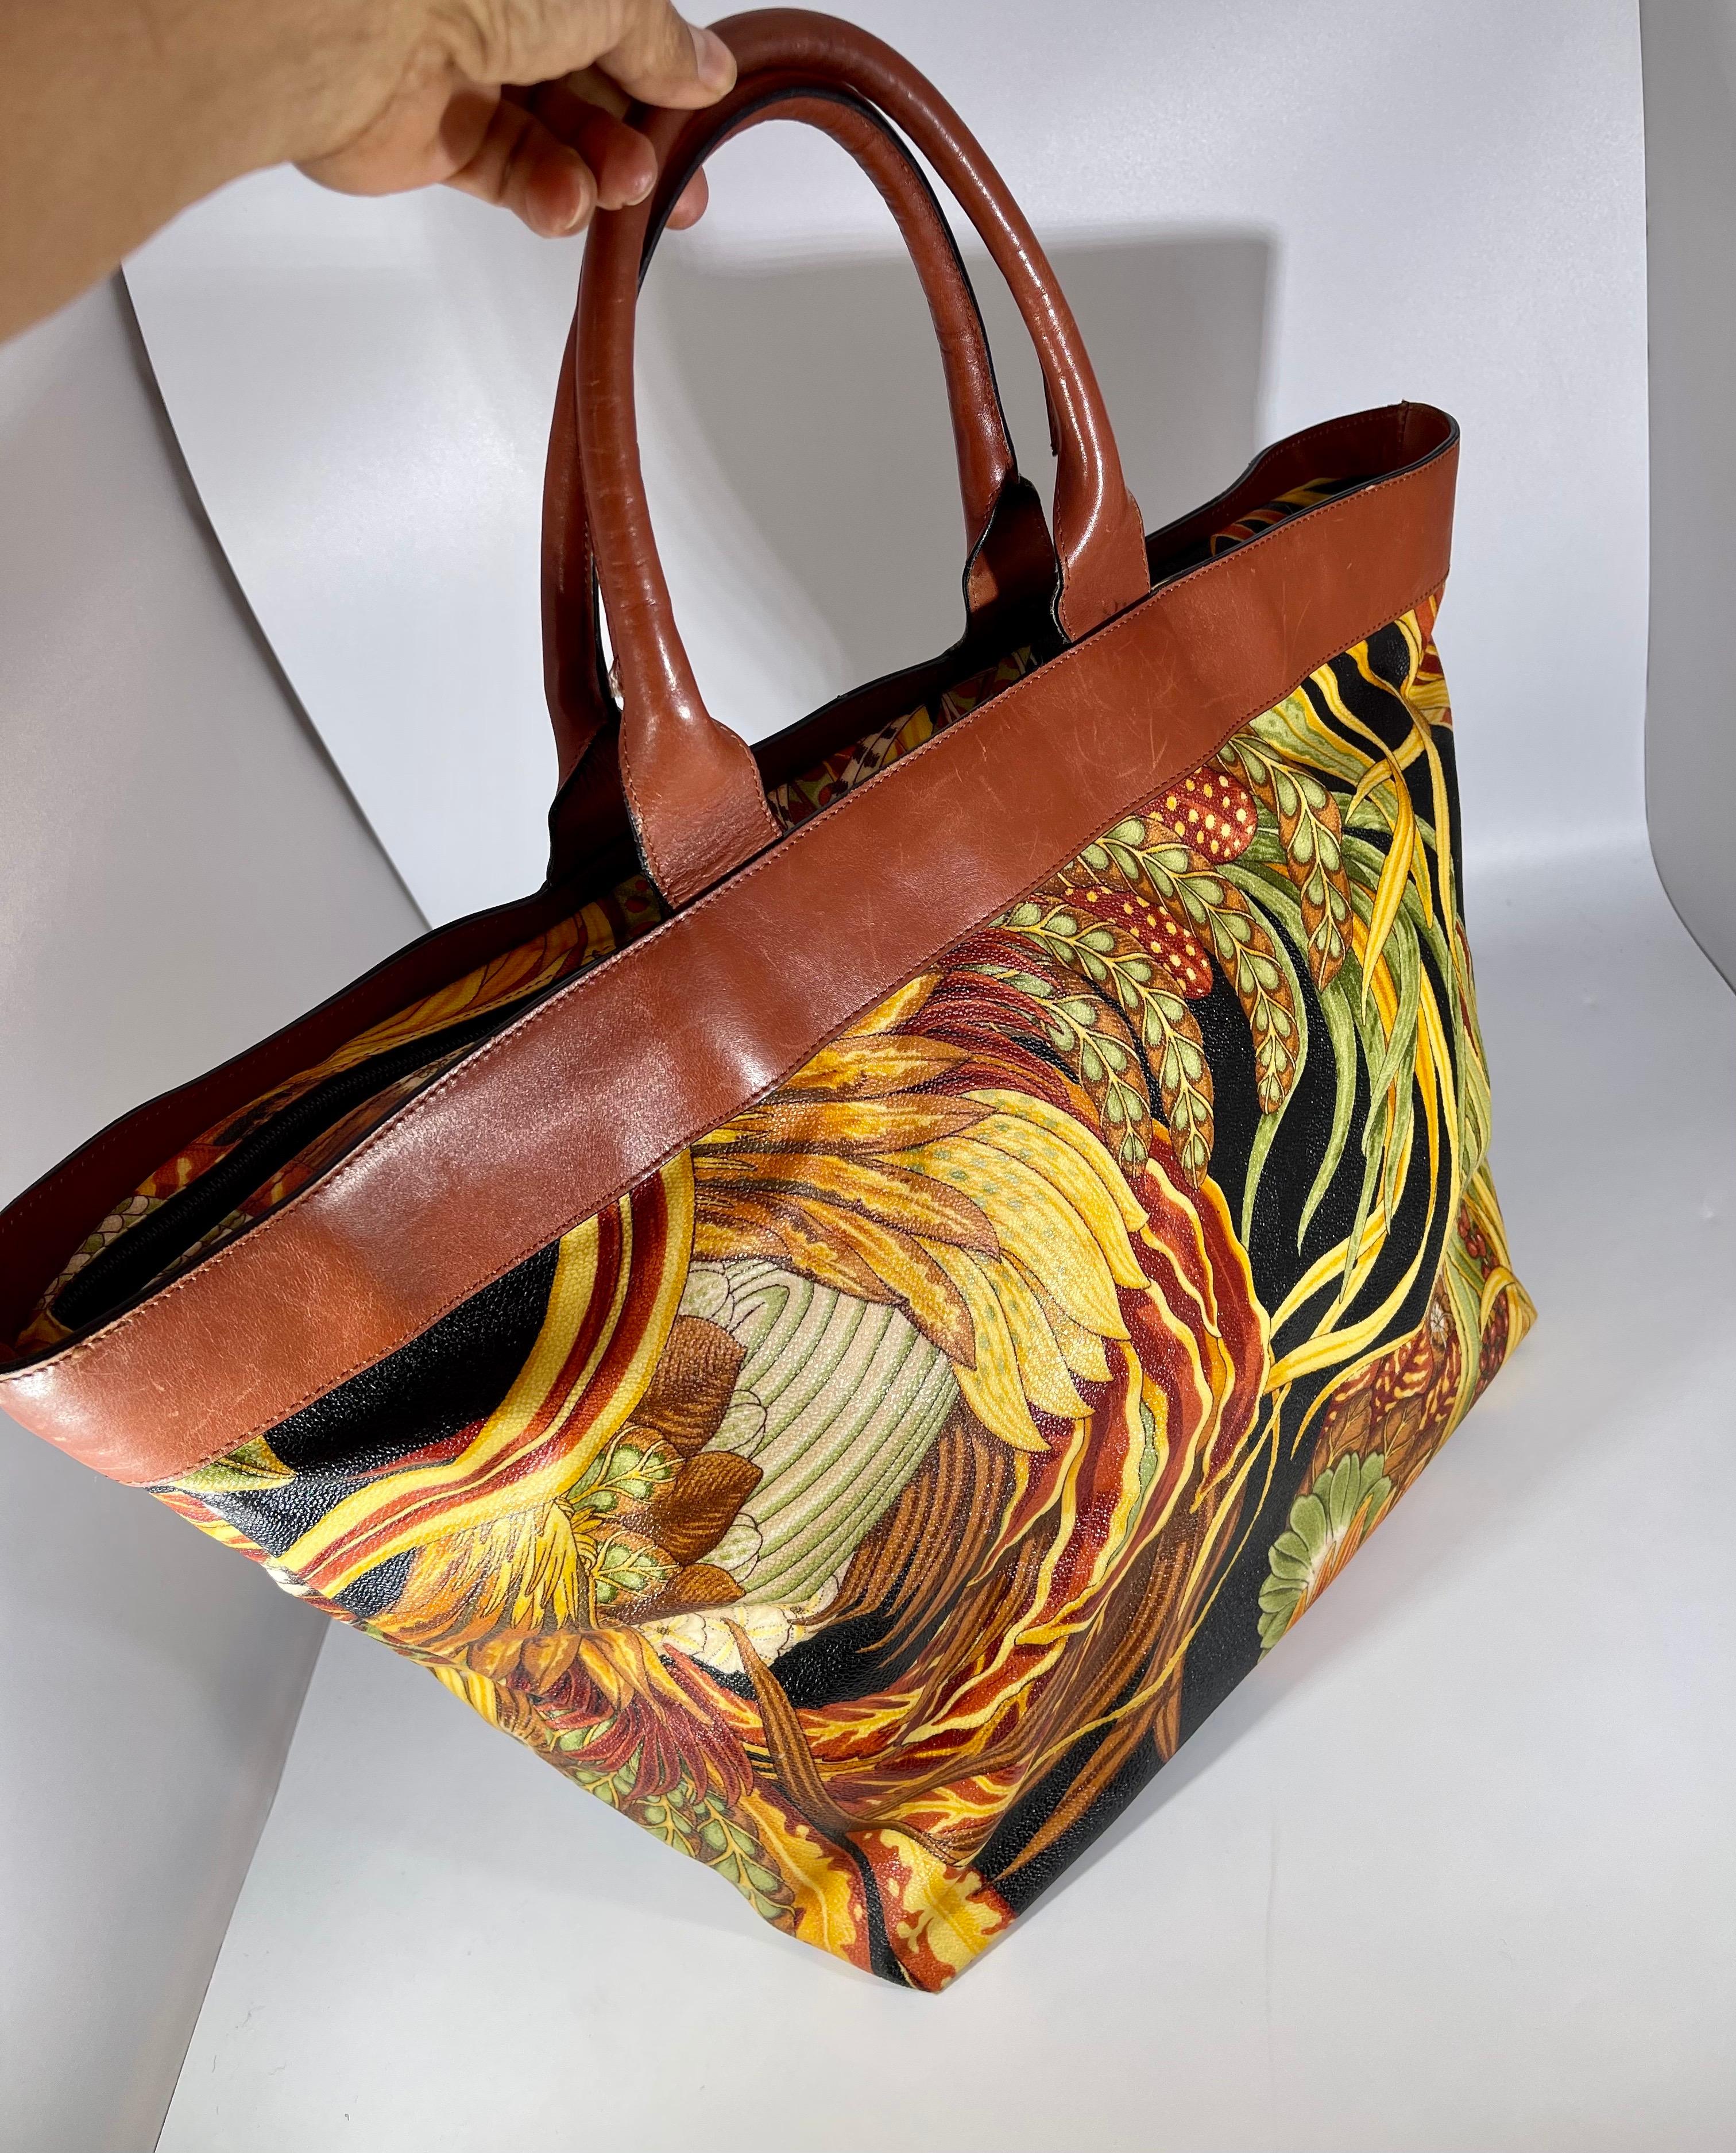 Ferragamo Travel print Tote bag Leather/Nylon Multicolor Large + matching pouch 8